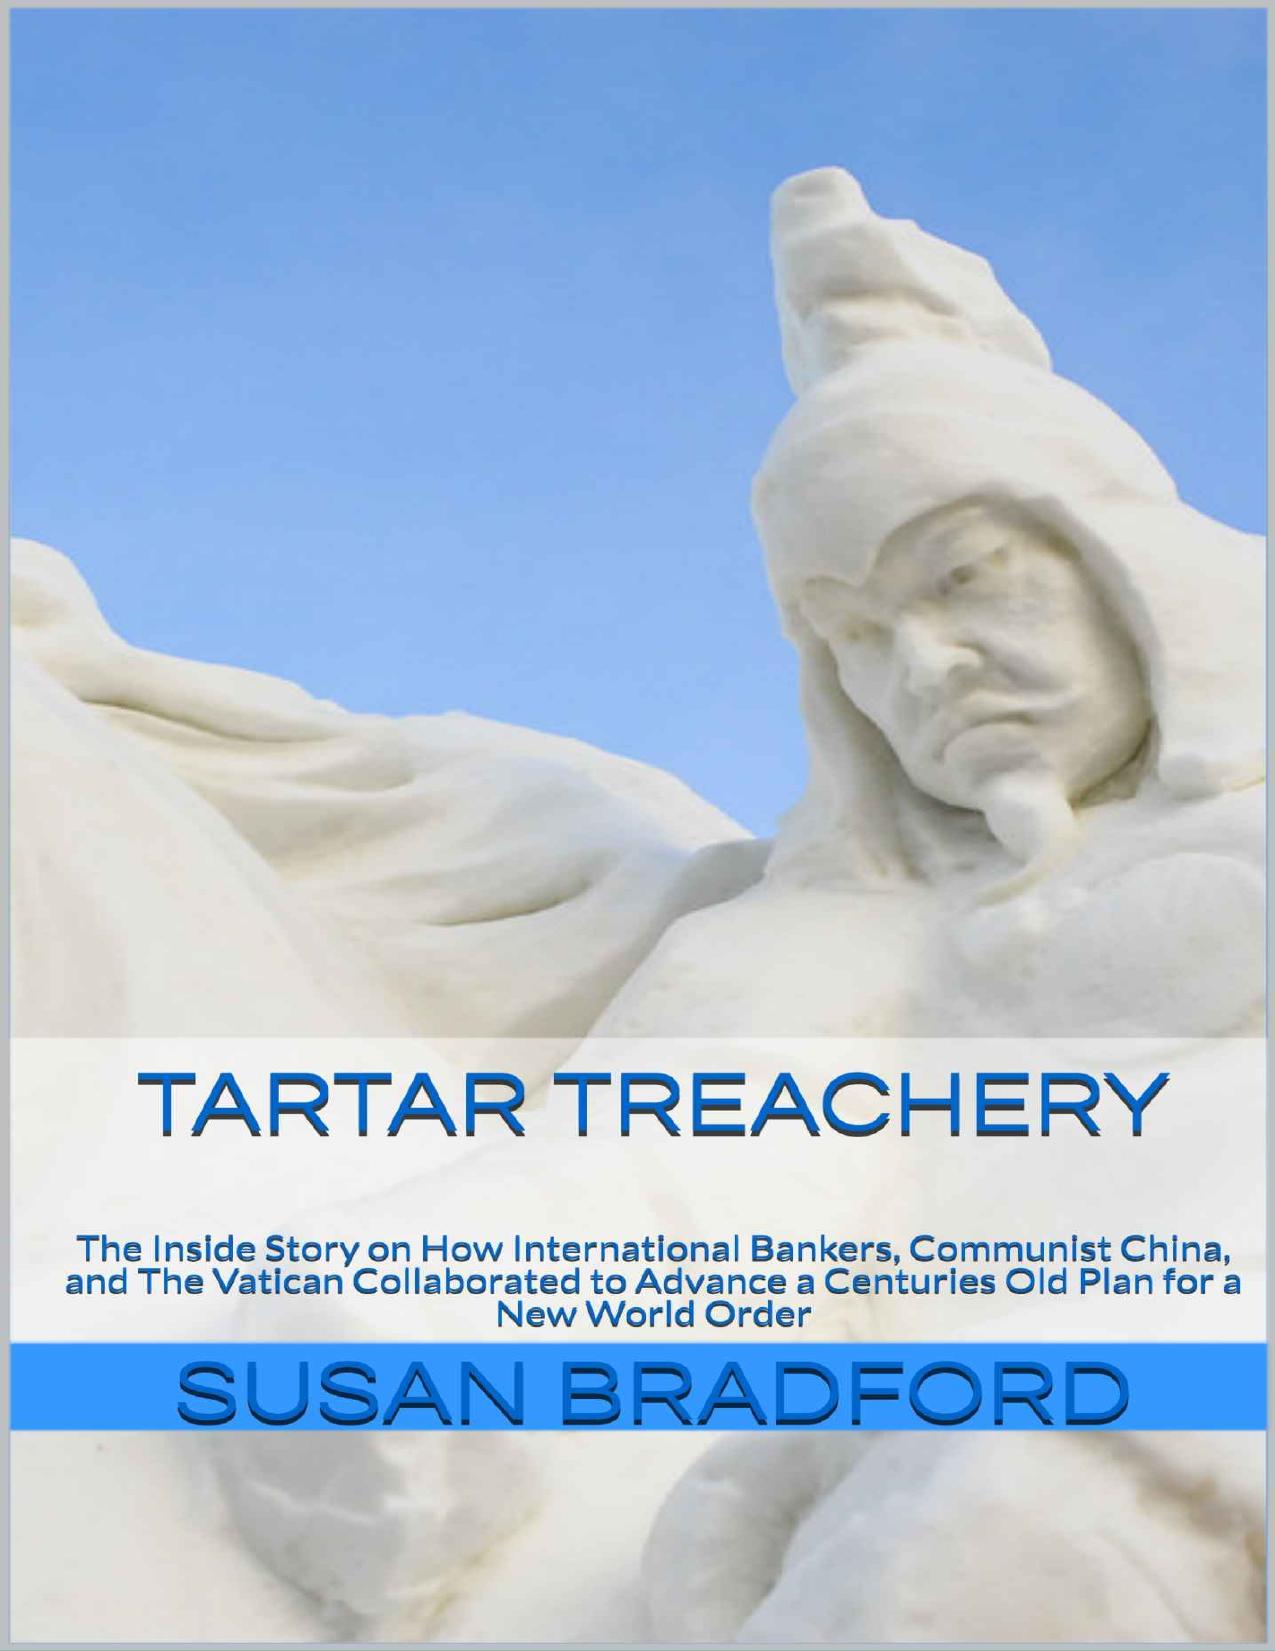 Tartar Treachery: The Inside Story on How International Bankers, Communist China, and the Vatican Collaborated to Advance a Centuries Old Plan for a New World Order